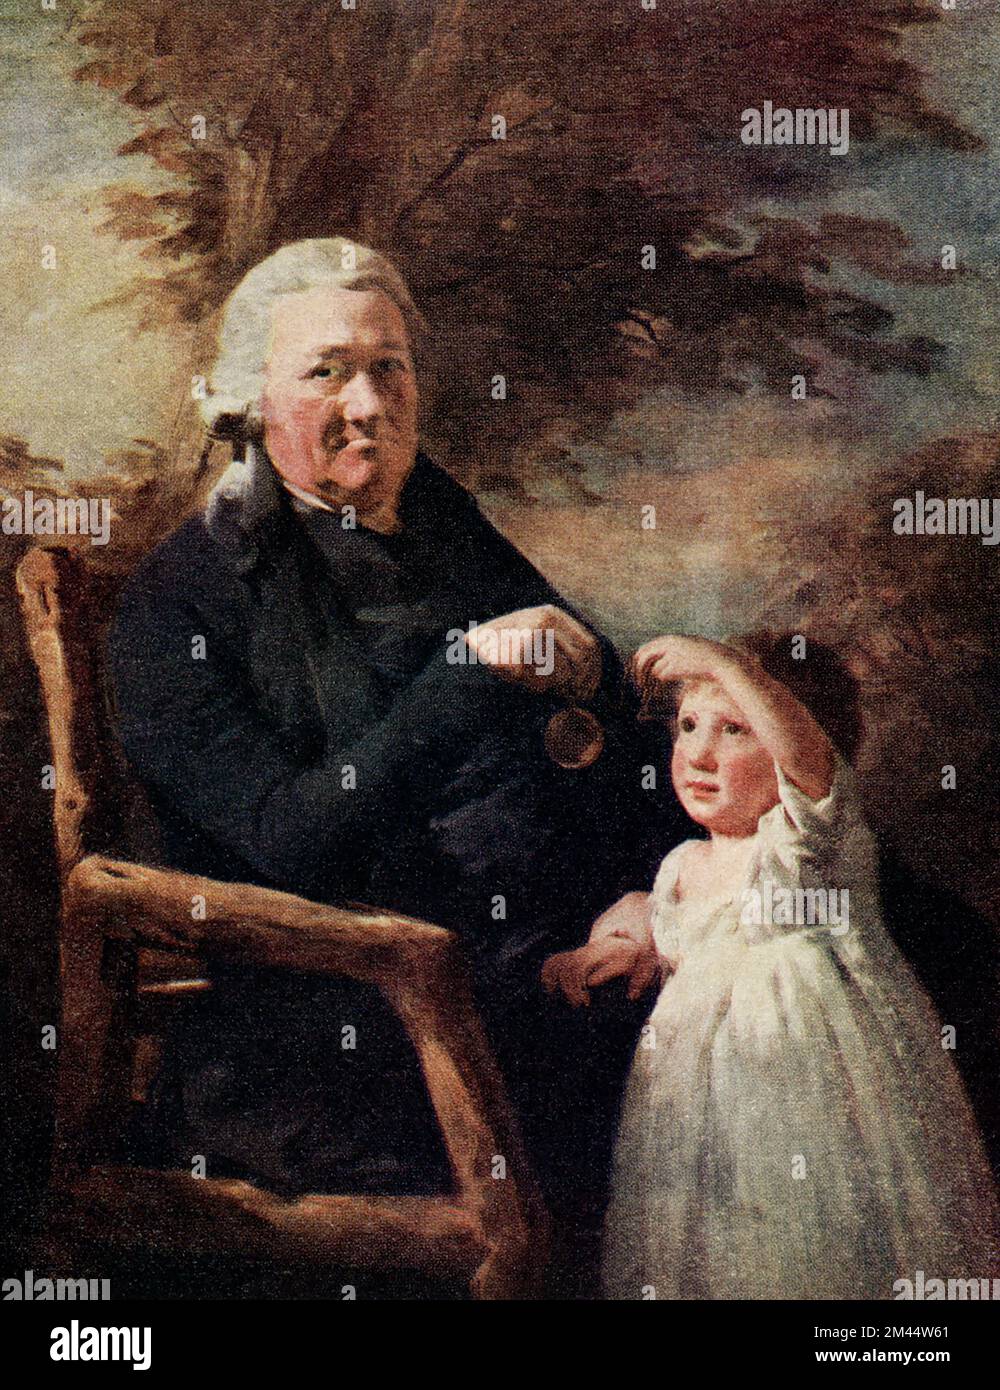 The caption for this image, written about 1910, reads: “John Tait of Harvieston and His Grandson by Raeburn (1756-1823). One of the artist’s most virile and trenchant performances, it was painted in 1798-9. The child was introduced after the grandfather’s death.” Sir Henry Raeburn (1756 – 1823) was a Scottish portrait painter. He served as Portrait Painter to King George IV in Scotland. Stock Photo